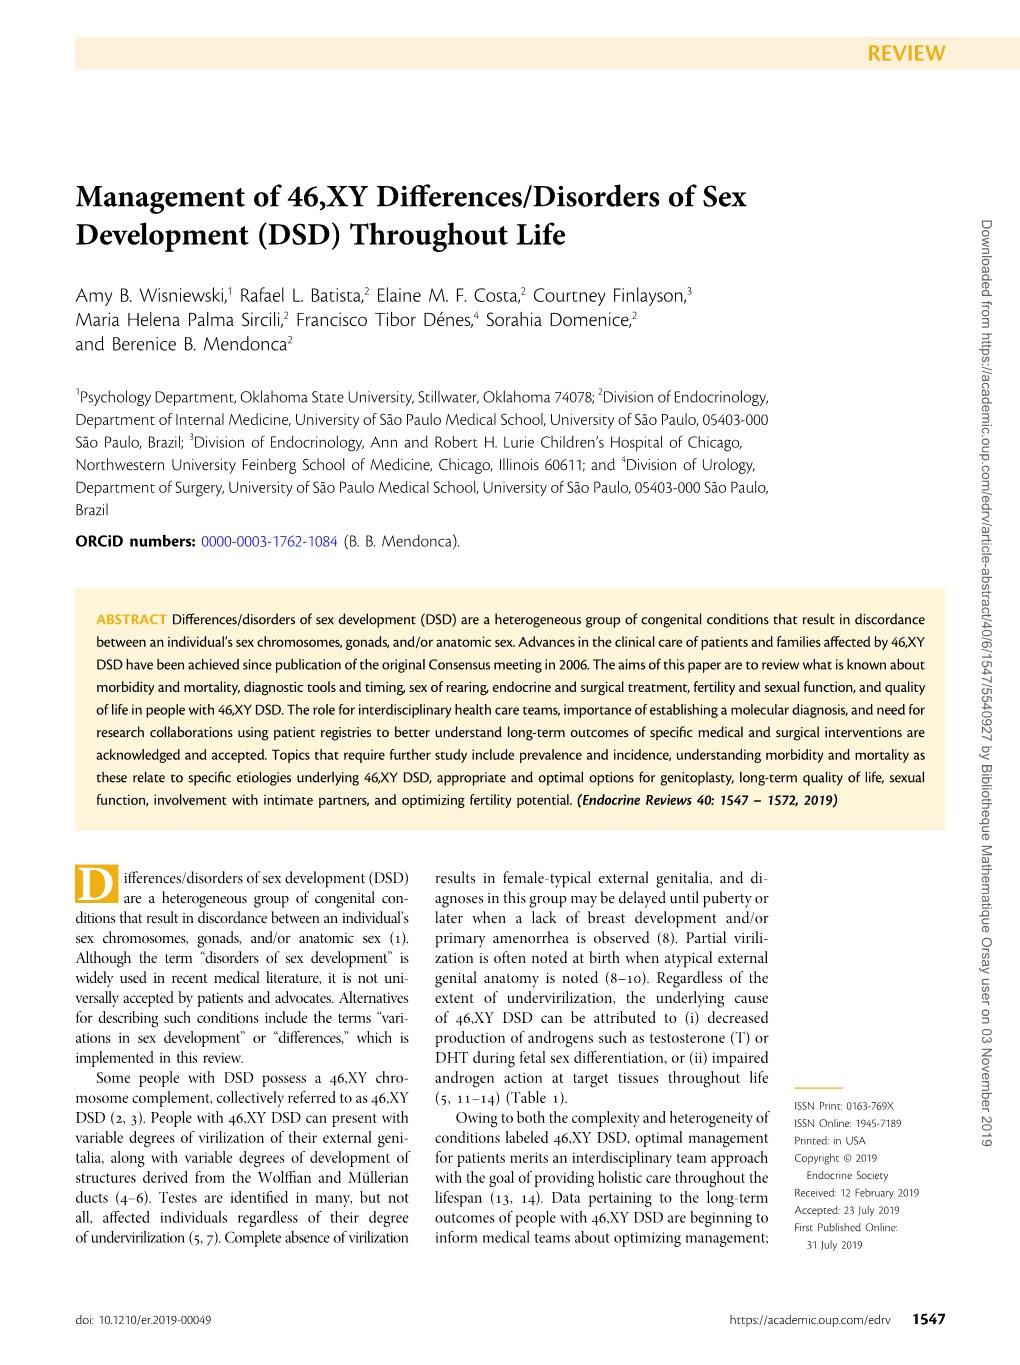 Management Of 46xy Differencesdisorders Of Sex Development Dsd 0524